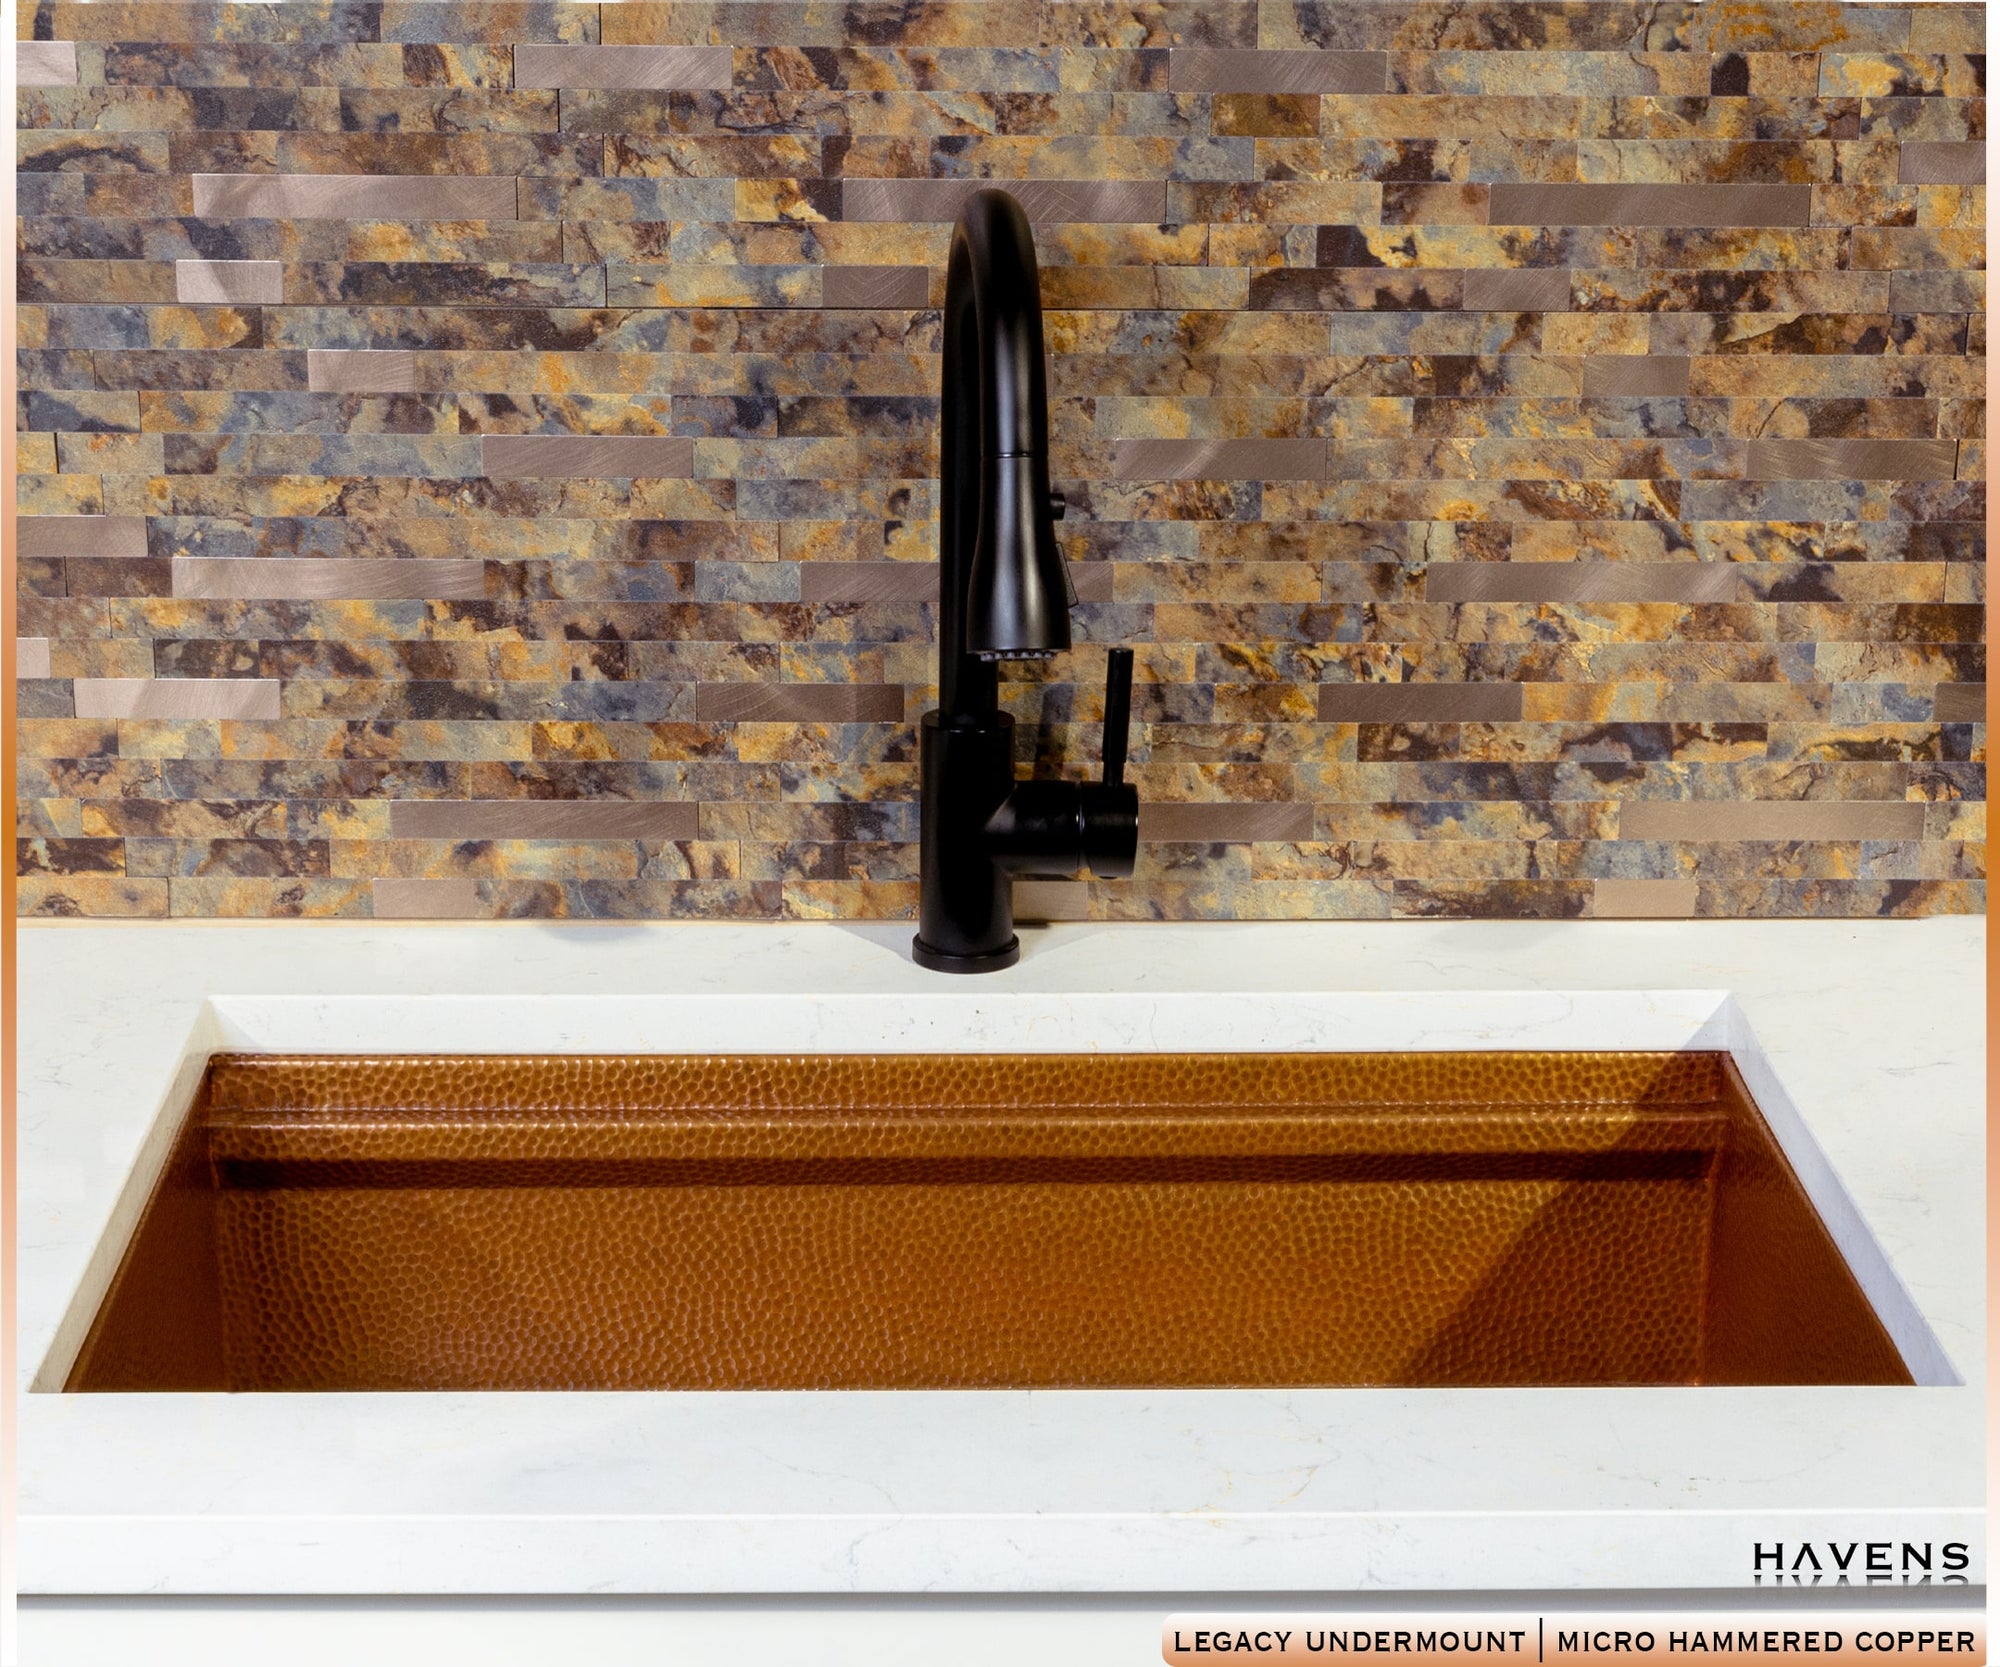 Legacy Undermount Sink - Micro Hammered Copper